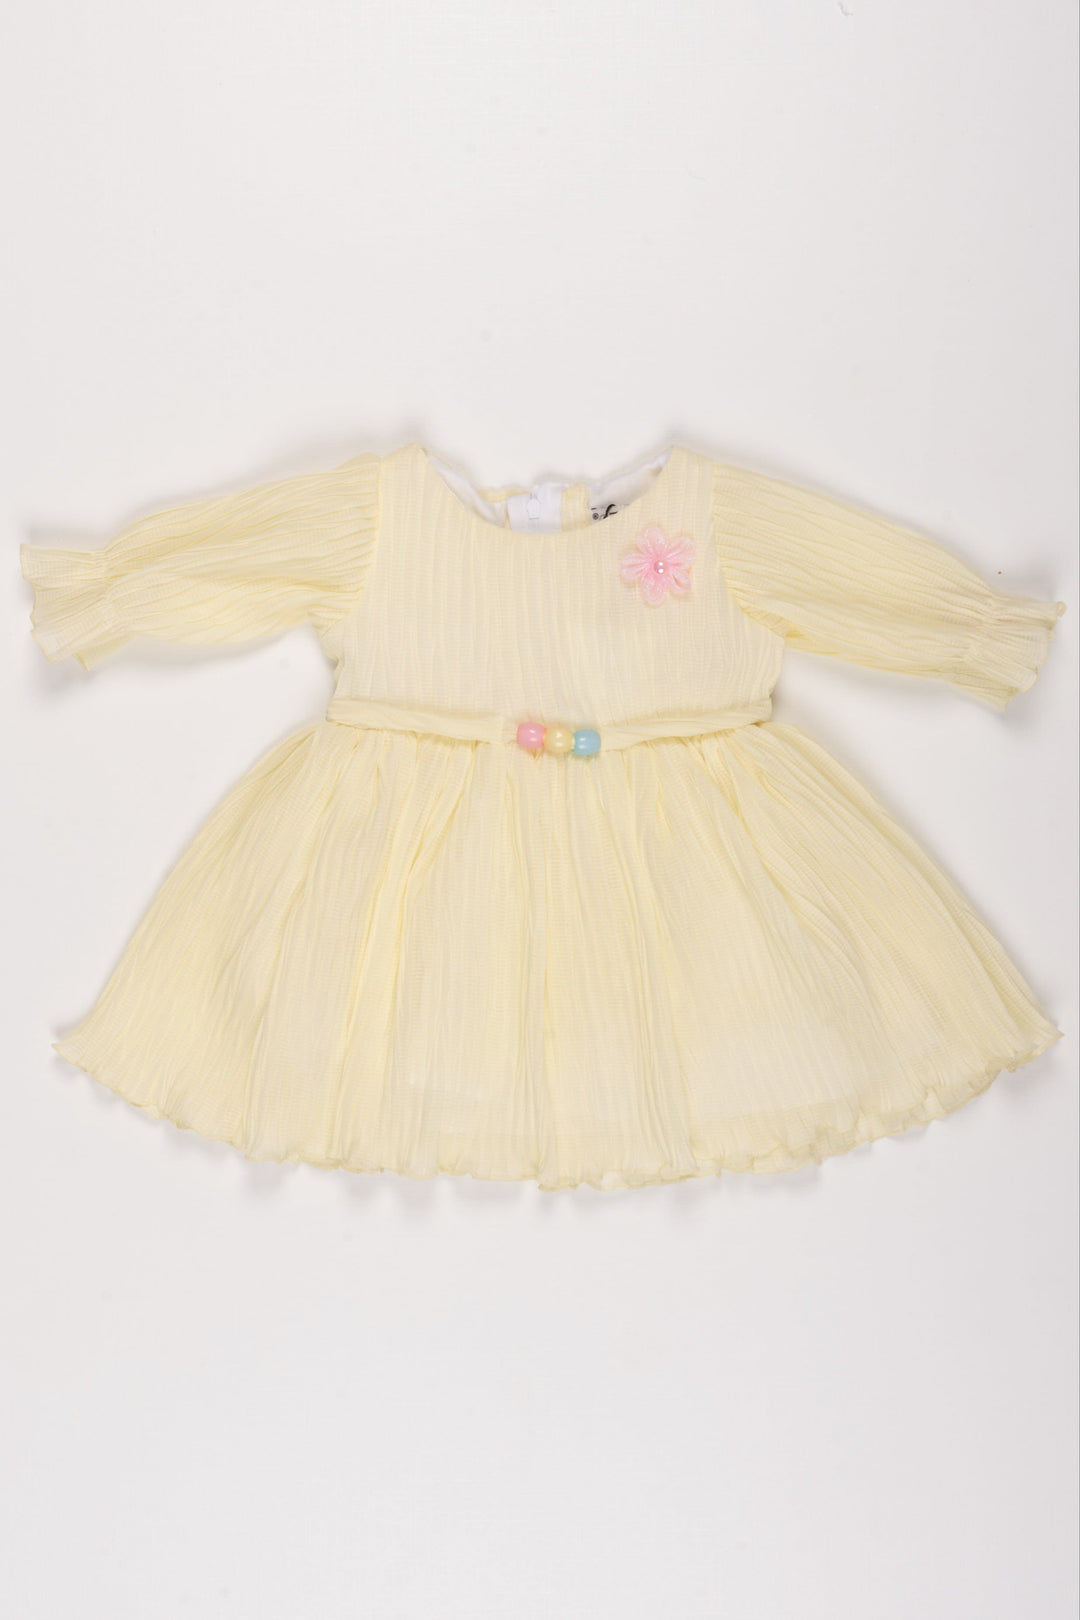 The Nesavu Baby Fancy Frock Girls Elegant Cream Pleated Tulle Dress with Floral Accent - Perfect for Special Occasions Nesavu 10 (NB) / Yellow BFJ498A-10 Girls' Cream Tulle Dress | Elegant Pleated Formal Baby Frocks | The Nesavu